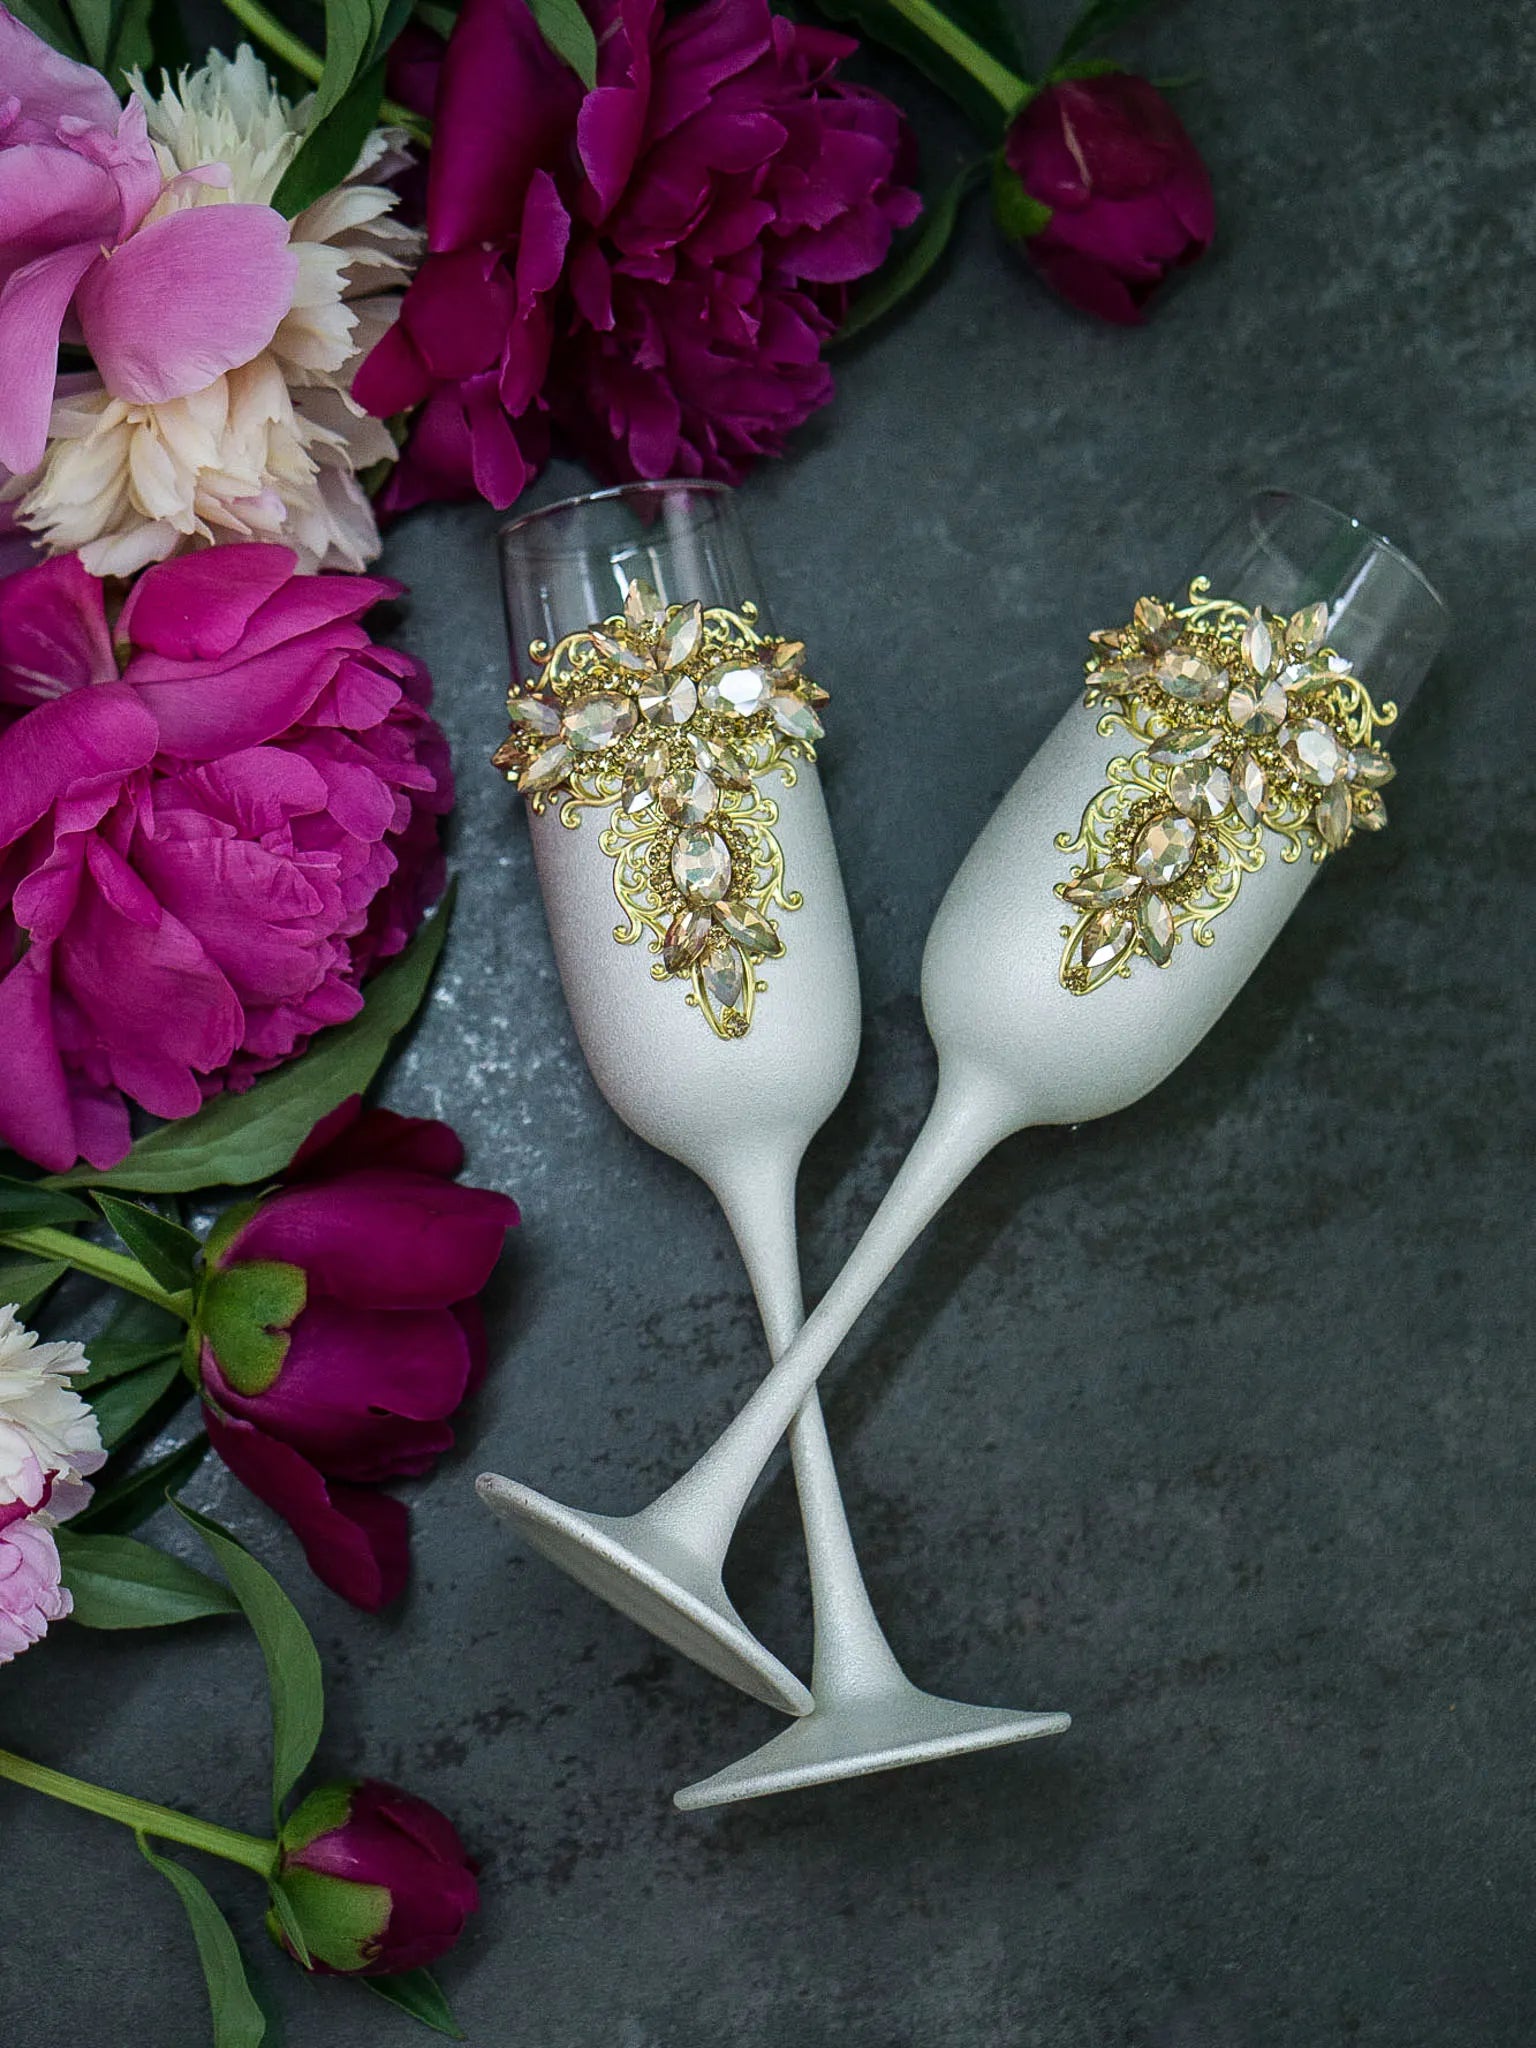 Engraved wedding champagne flutes with pristine white metallic paint